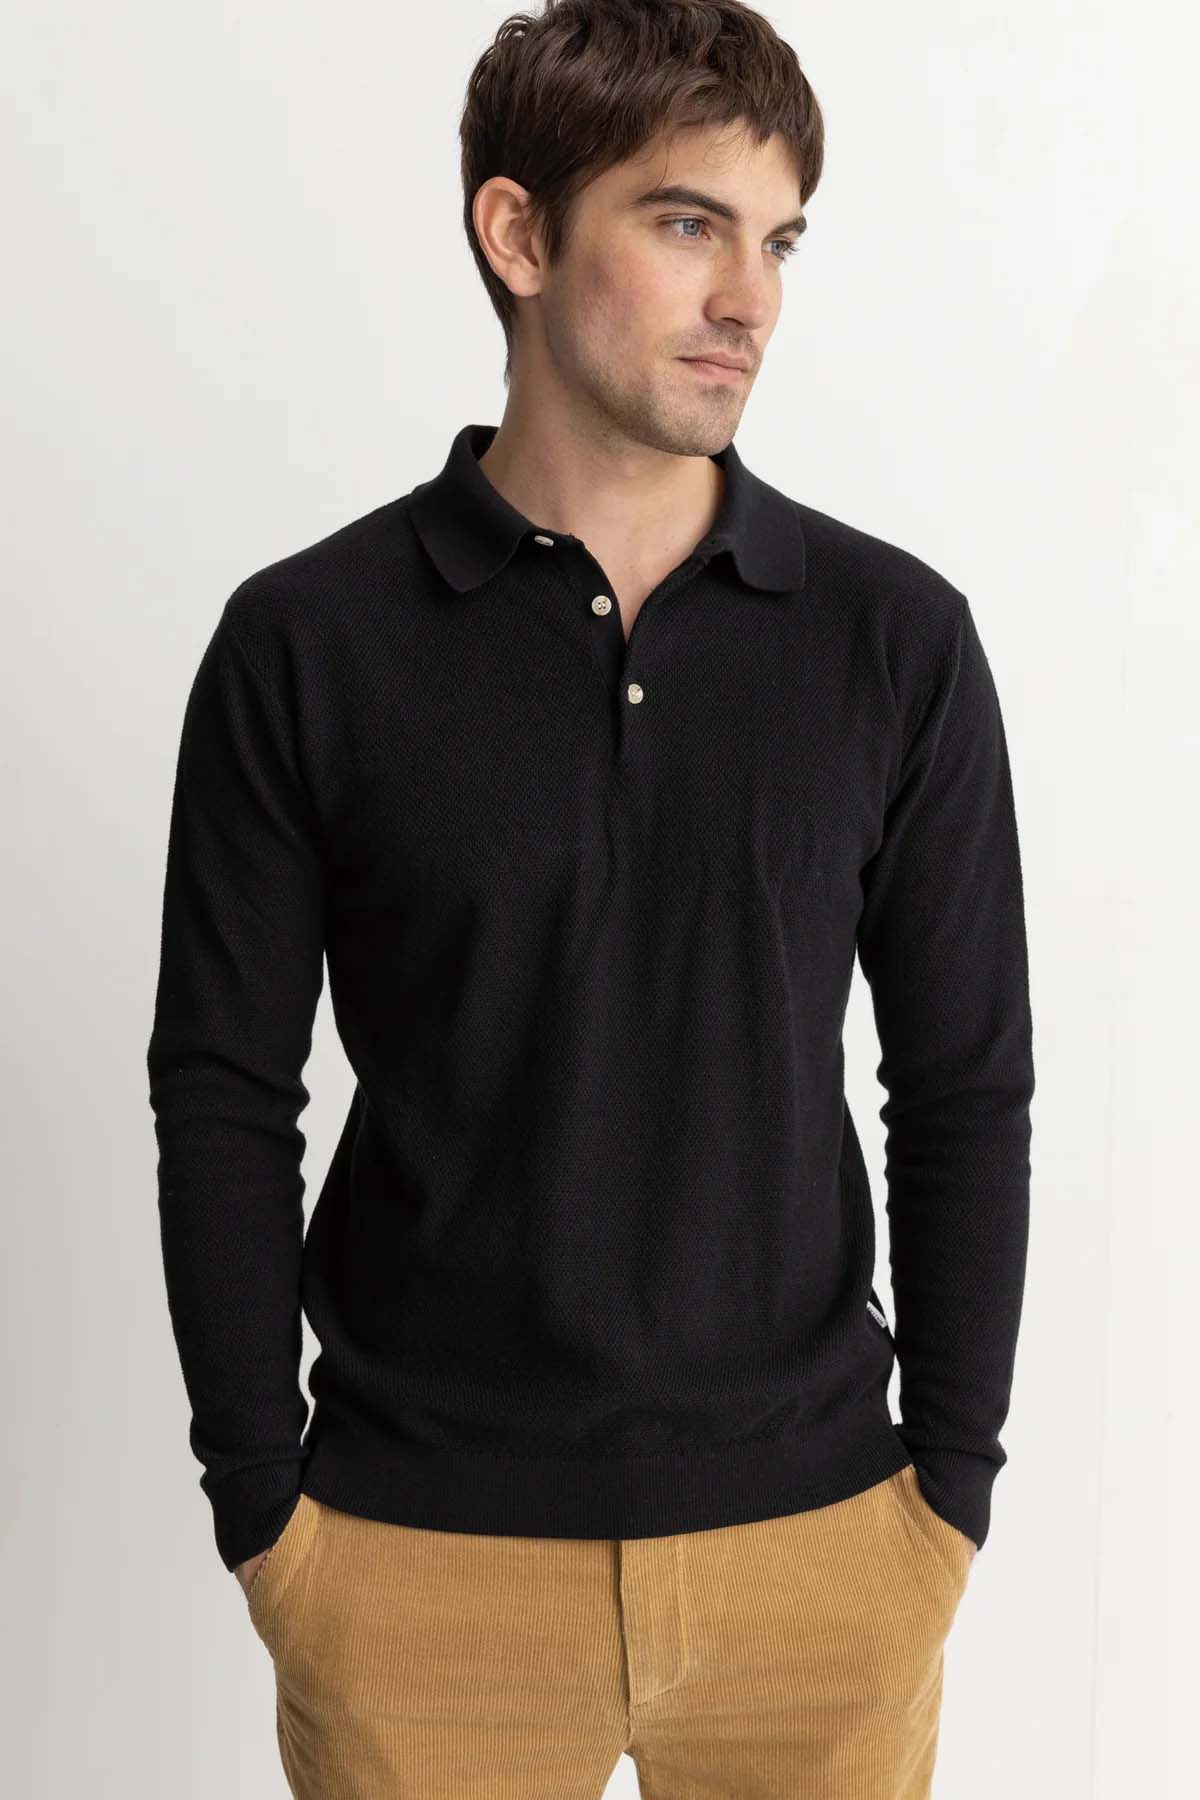 Rhythm - Textured Knit LS Polo - Black - Front